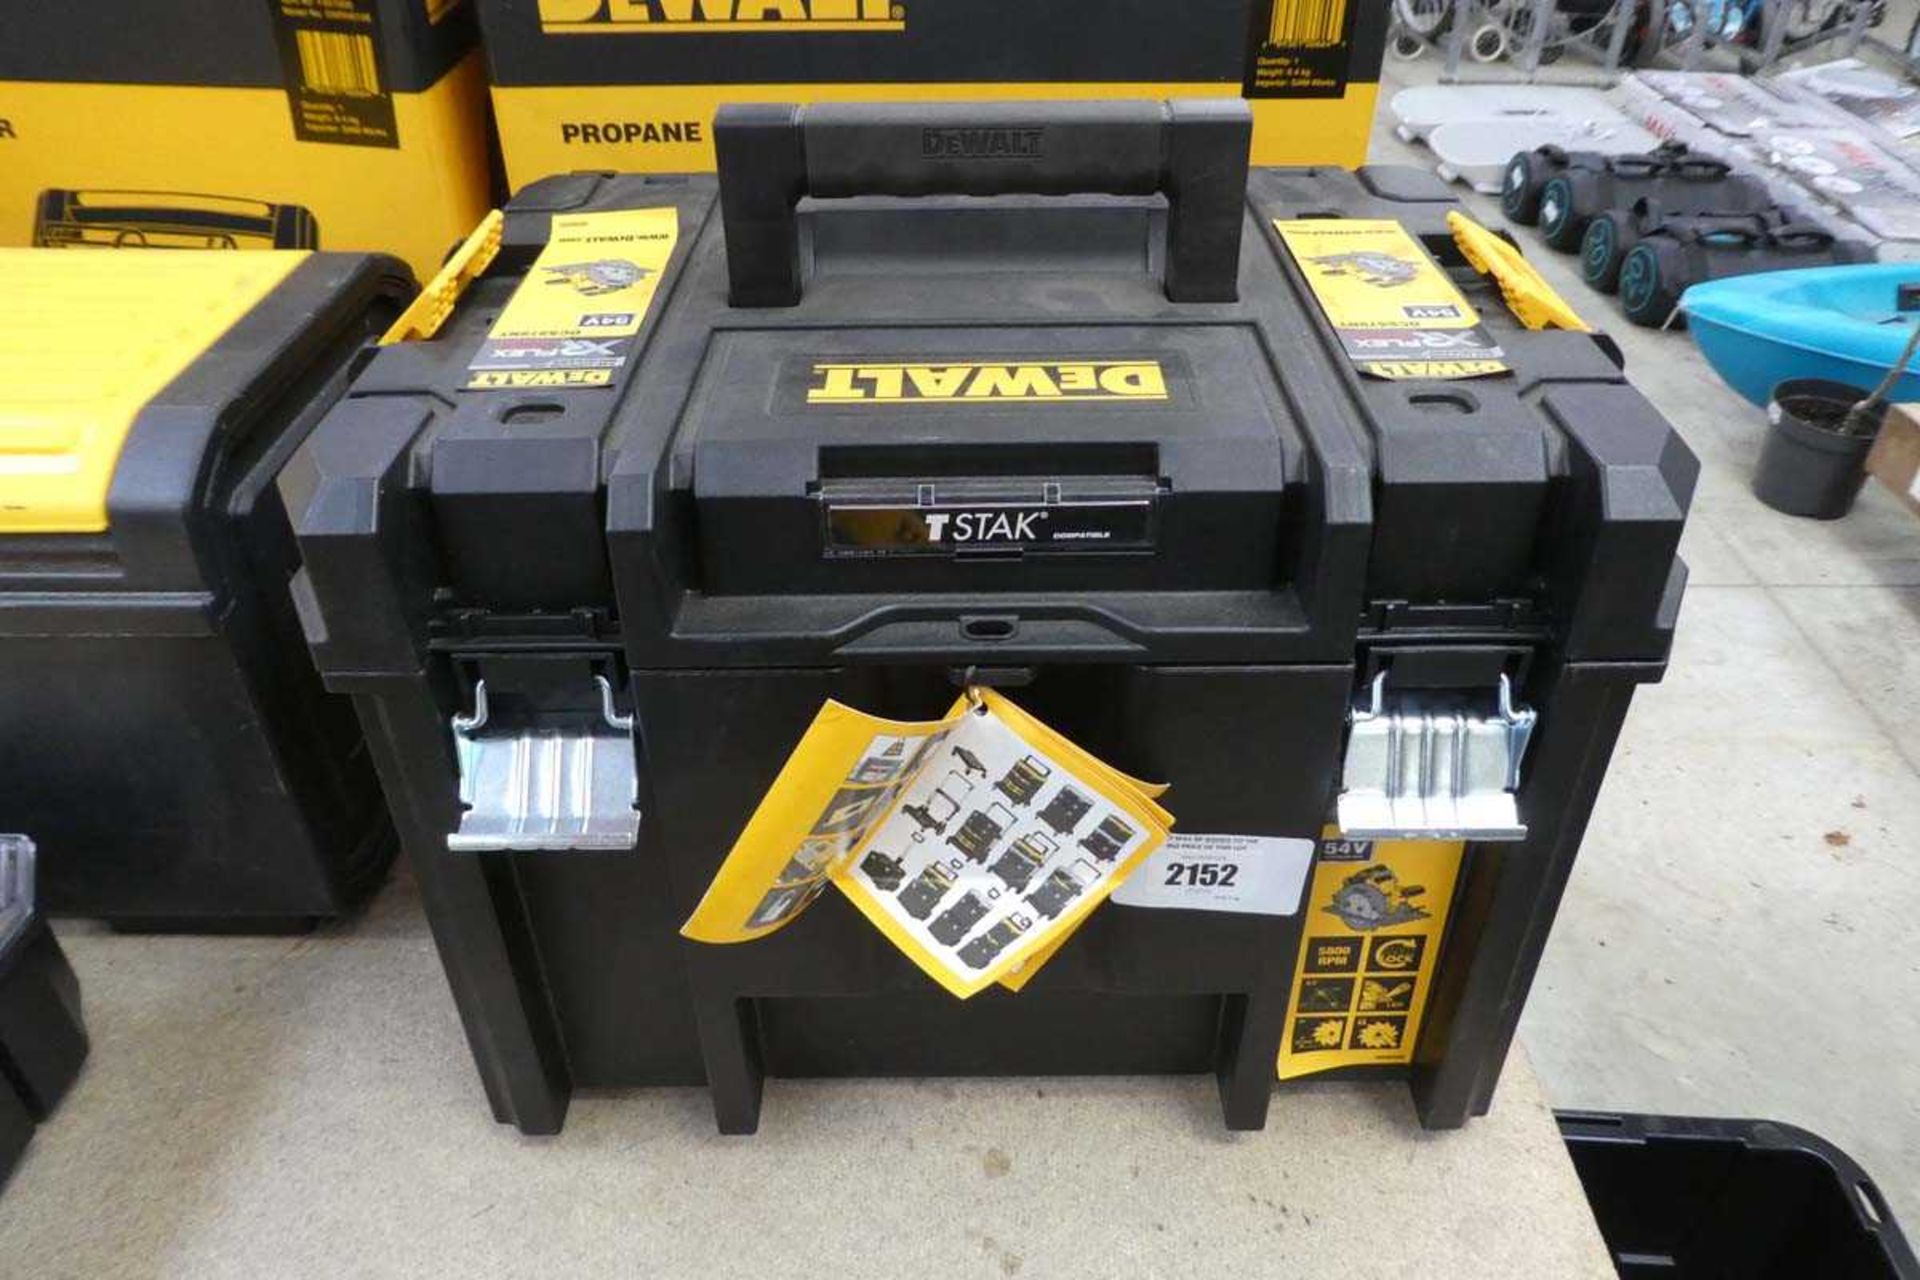 +VAT Cased DeWalt T Stack toolbox containing cordless DeWalt circular saw - no battery or charger